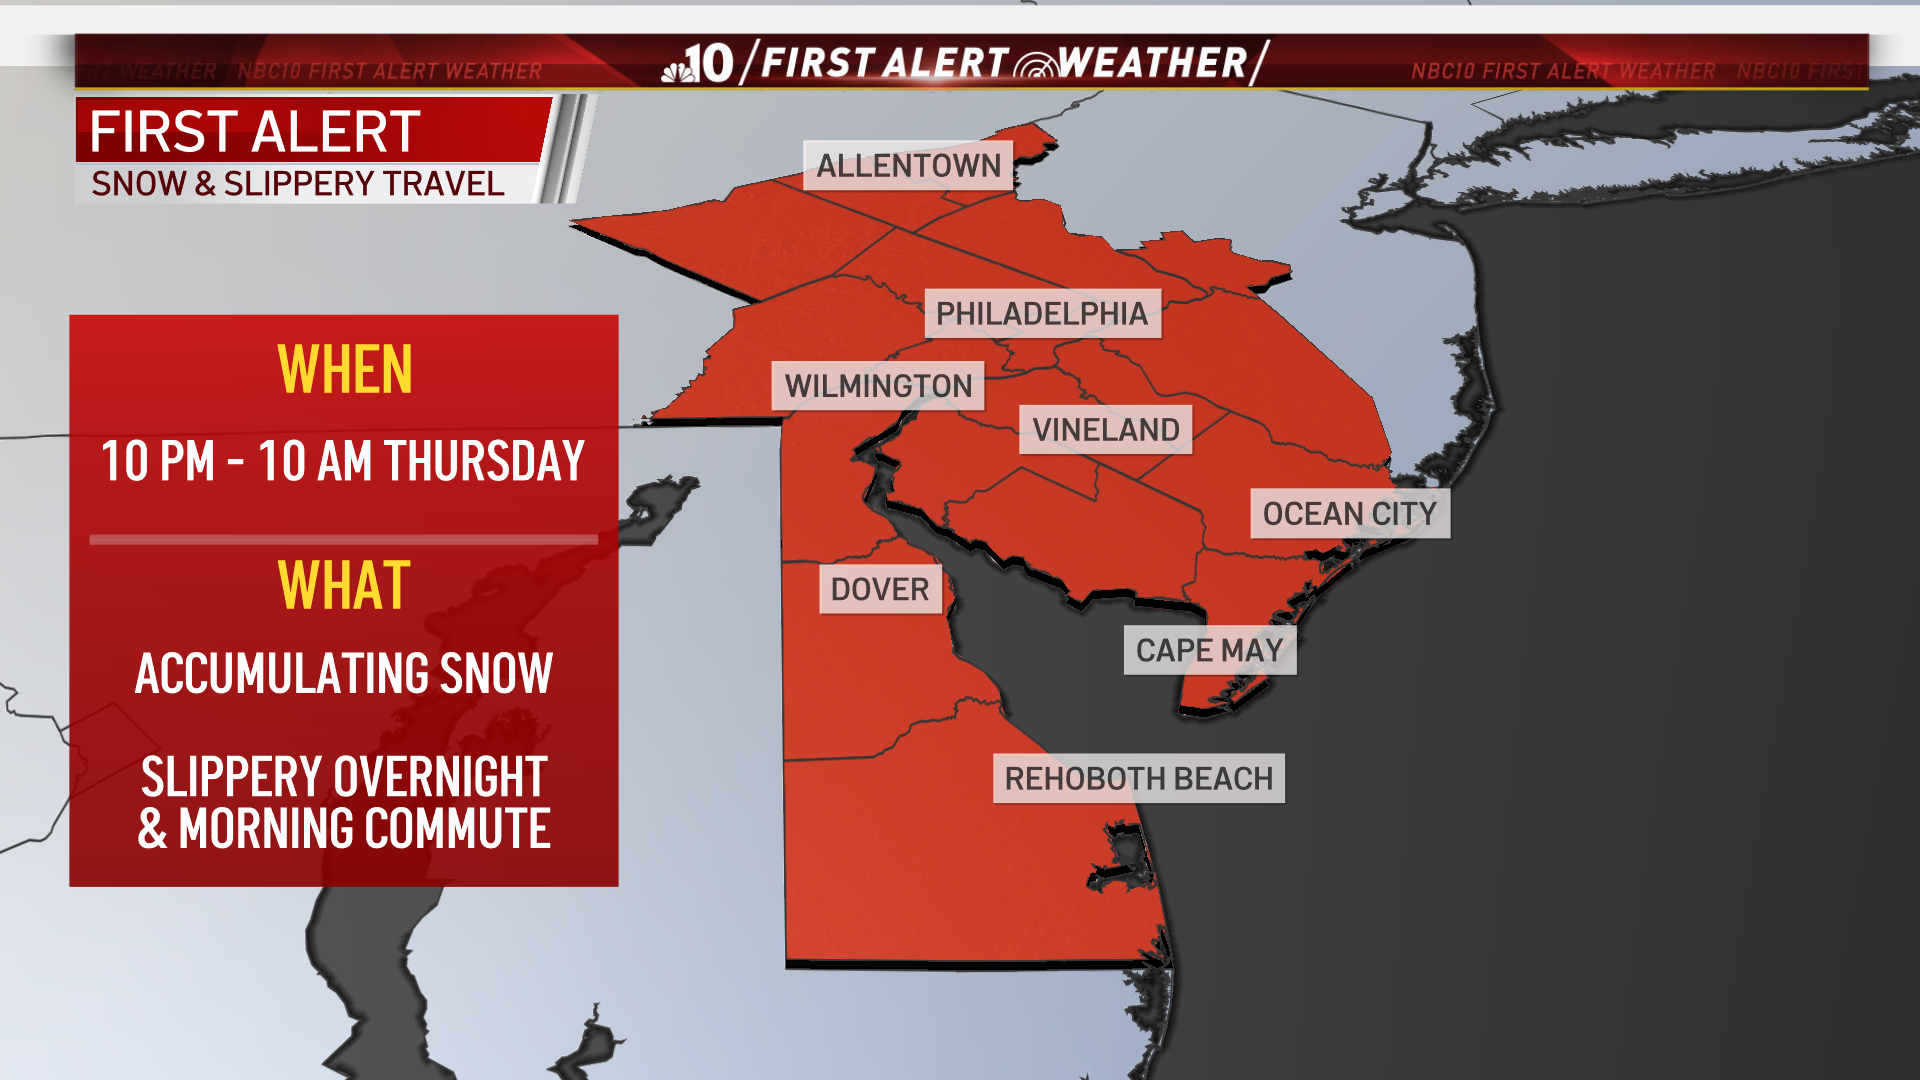 A graphic depicts a First Alert showing snow and slippery driving conditions in the Philly region